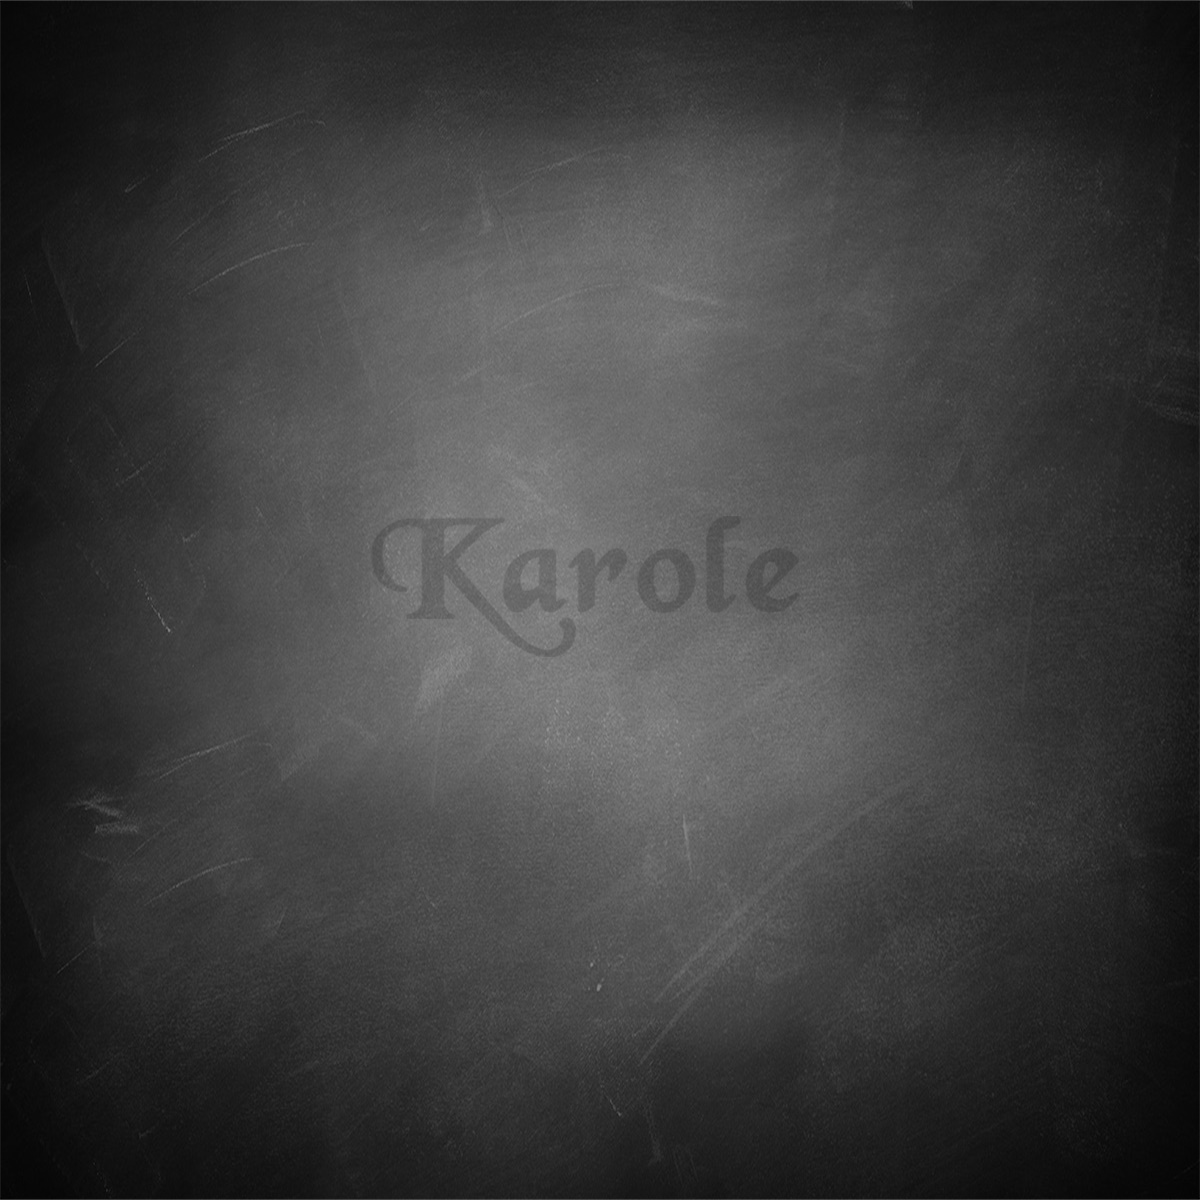 Karole Mead Abstract Art Black White Backdrop for Photography